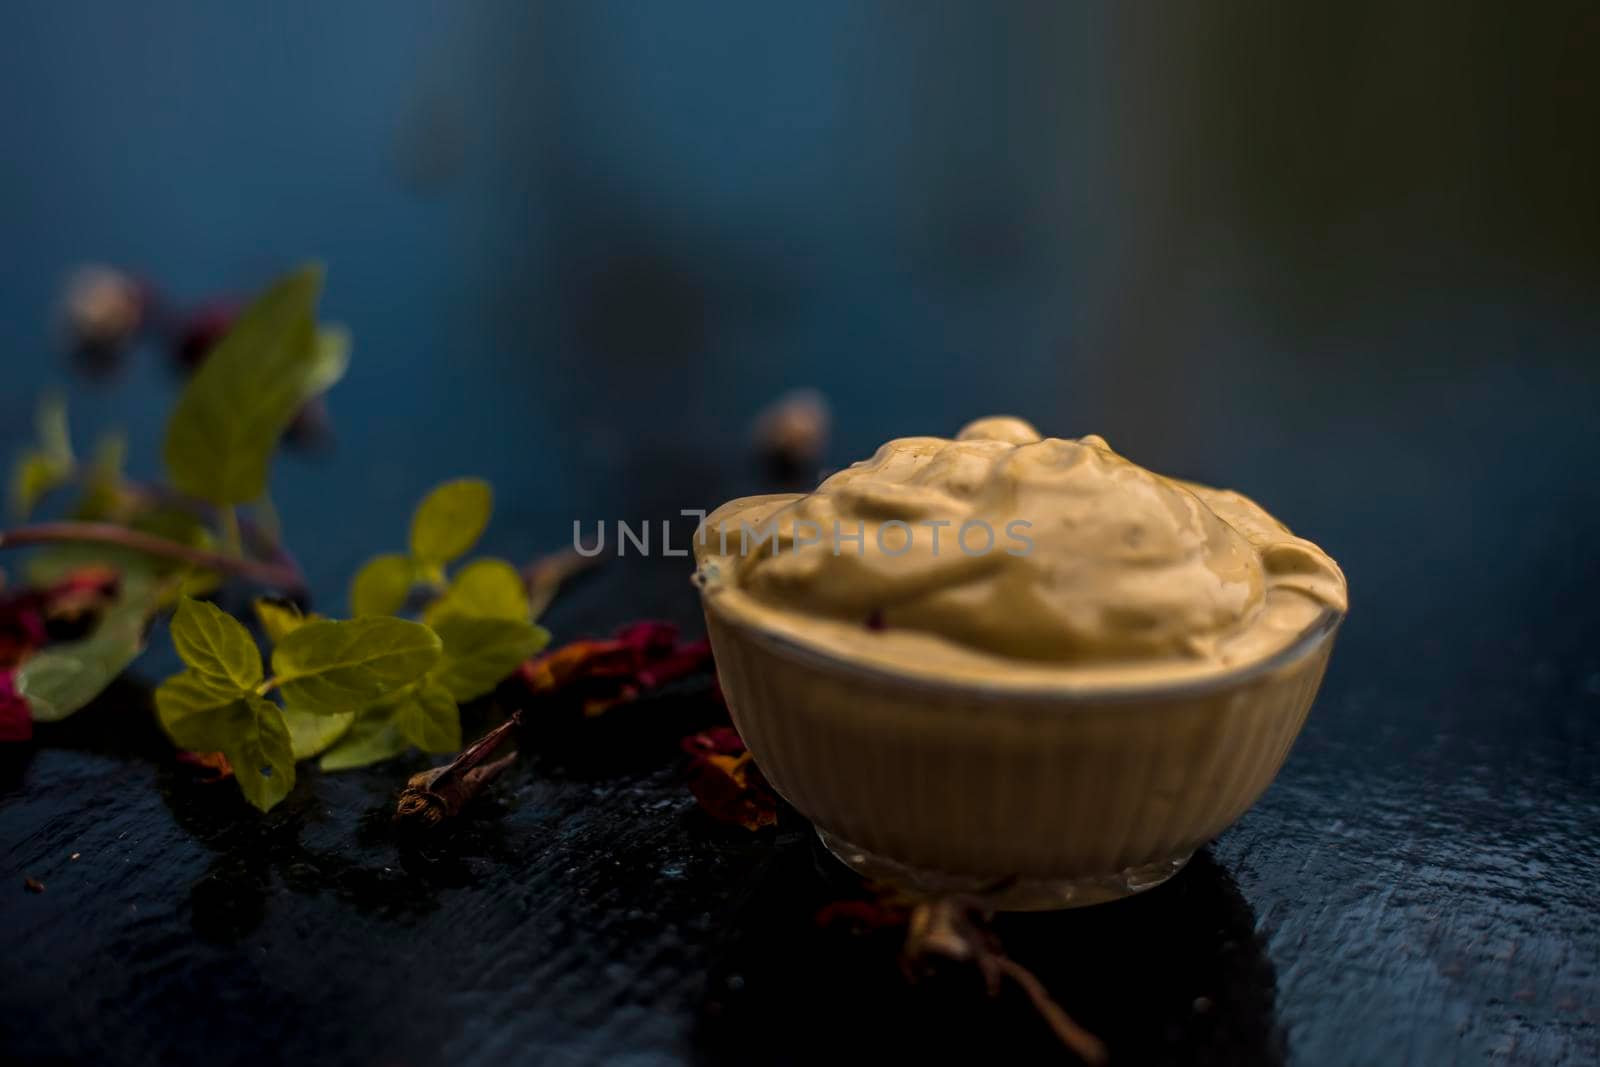 Homemade DIY face mask on the wooden surface consisting of yogurt,multani mitti or mulpani mitti (fuller's earth) and mint leaves in a glass bowl. For the treatment removal of dark patches. by mirzamlk